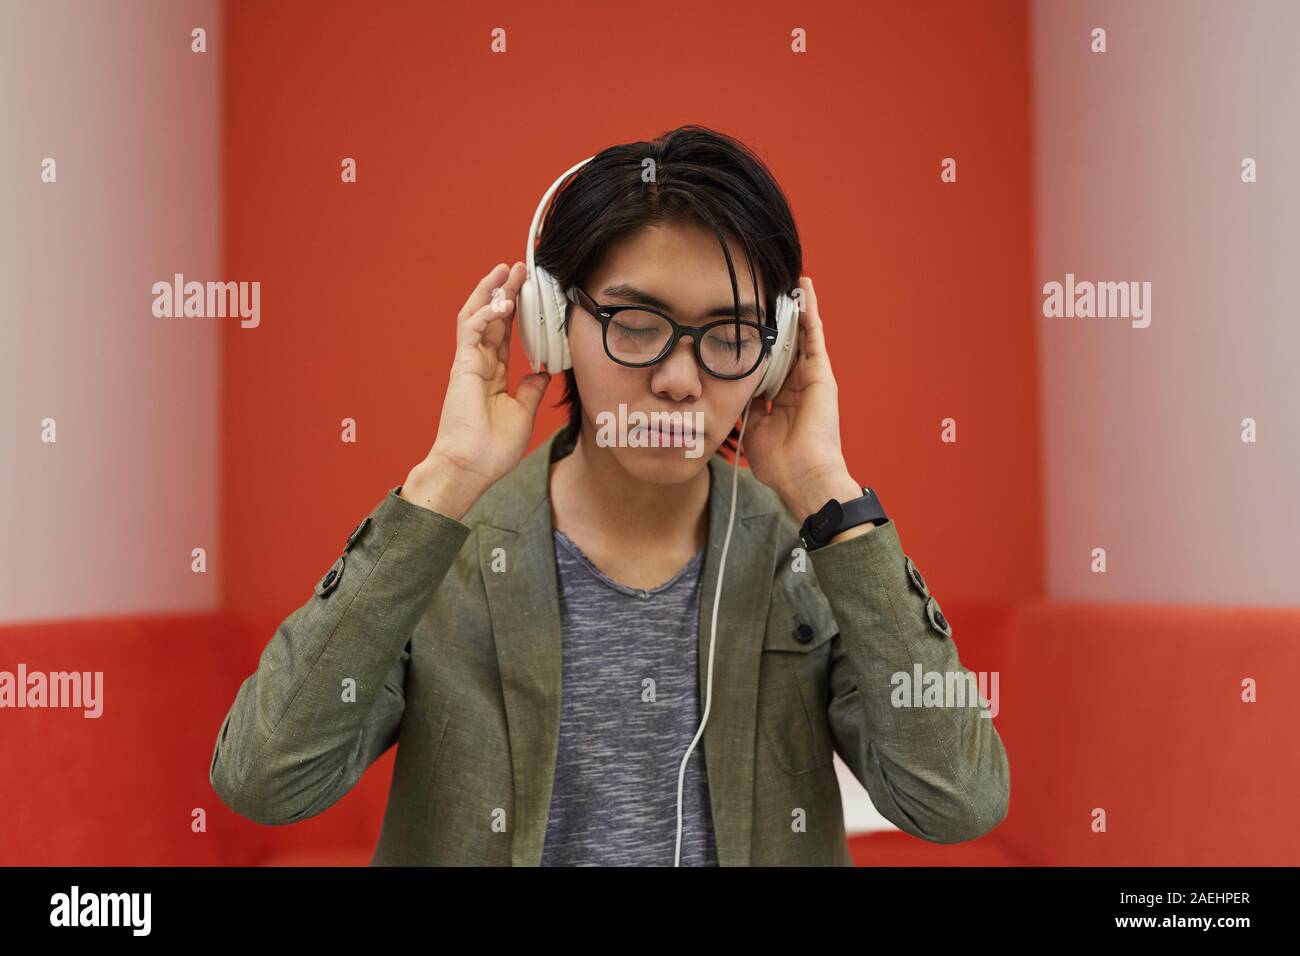 Asian young man in eyeglasses wearing headphones and listening to music with orange background Stock Photo